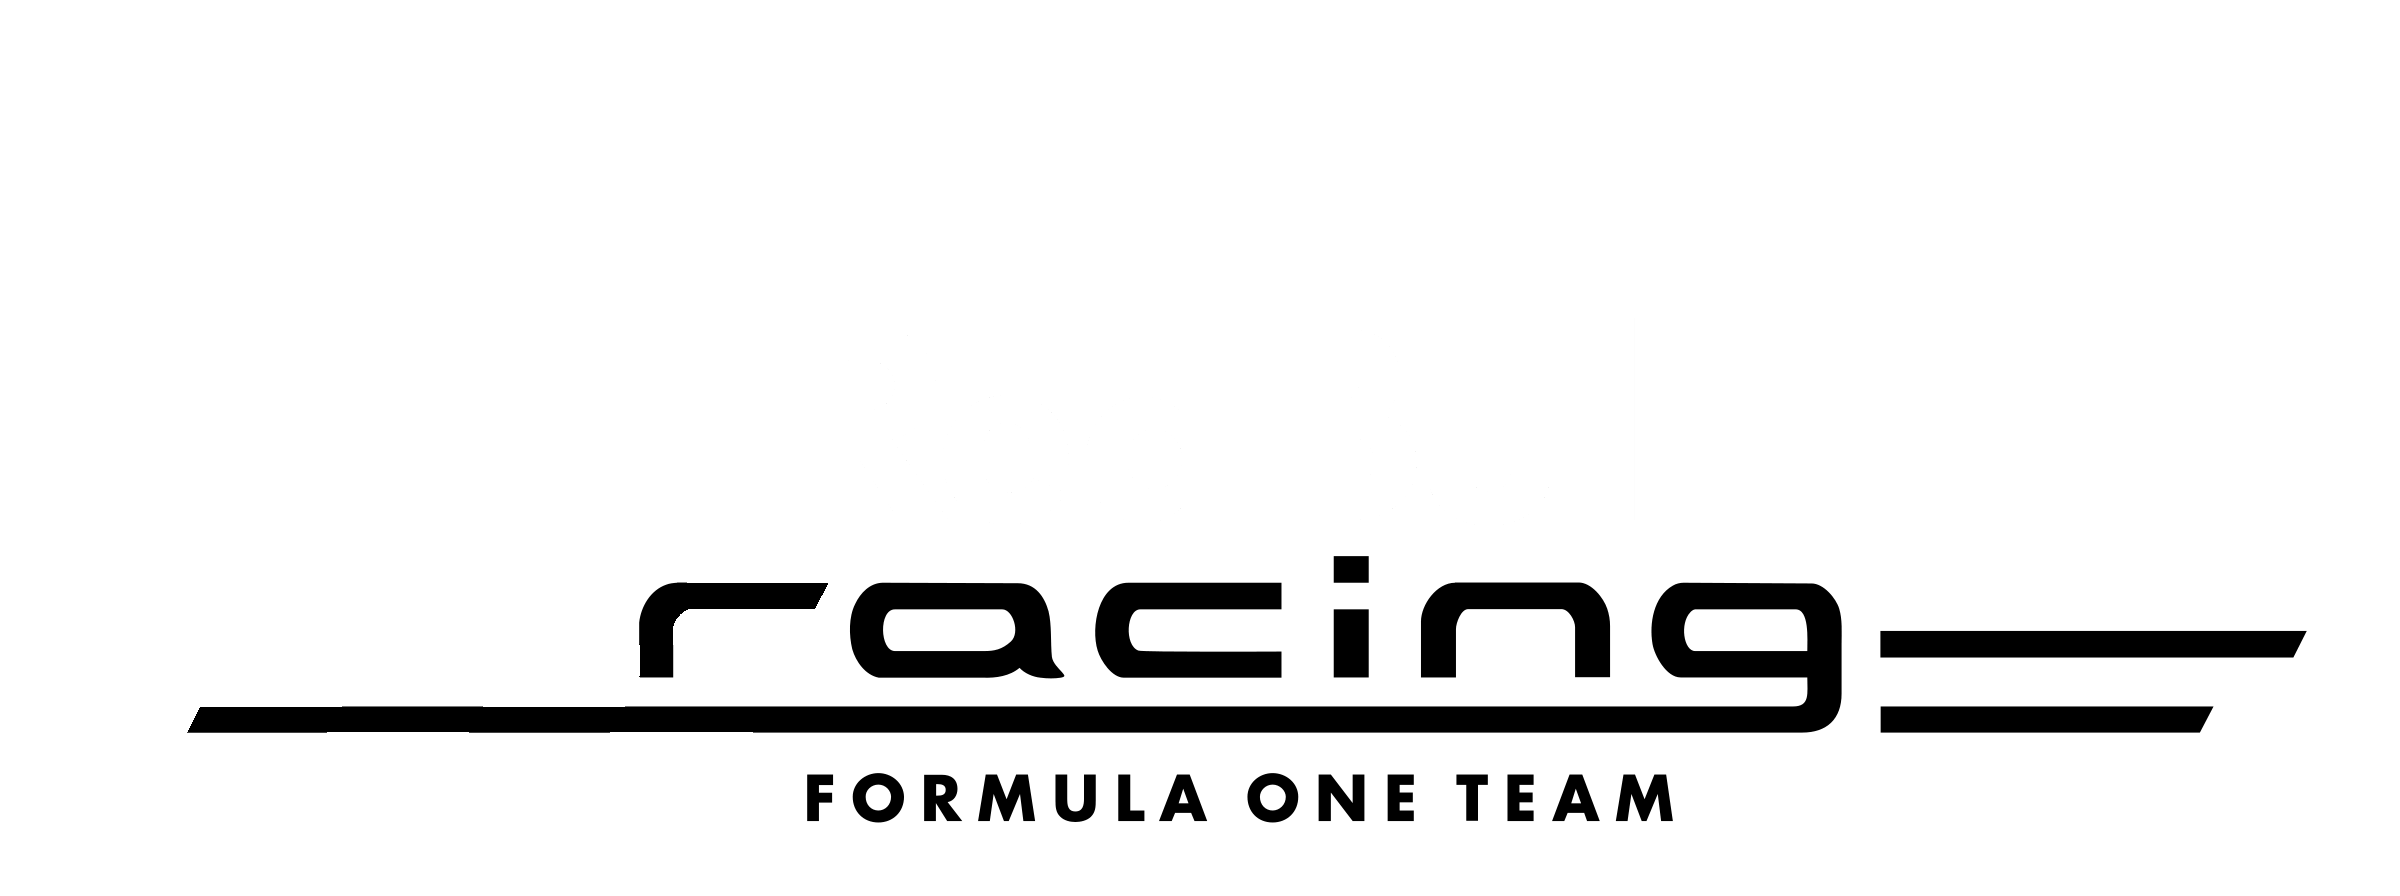 0 Result Images of Red Bull Logo Png 512x512 - PNG Image Collection